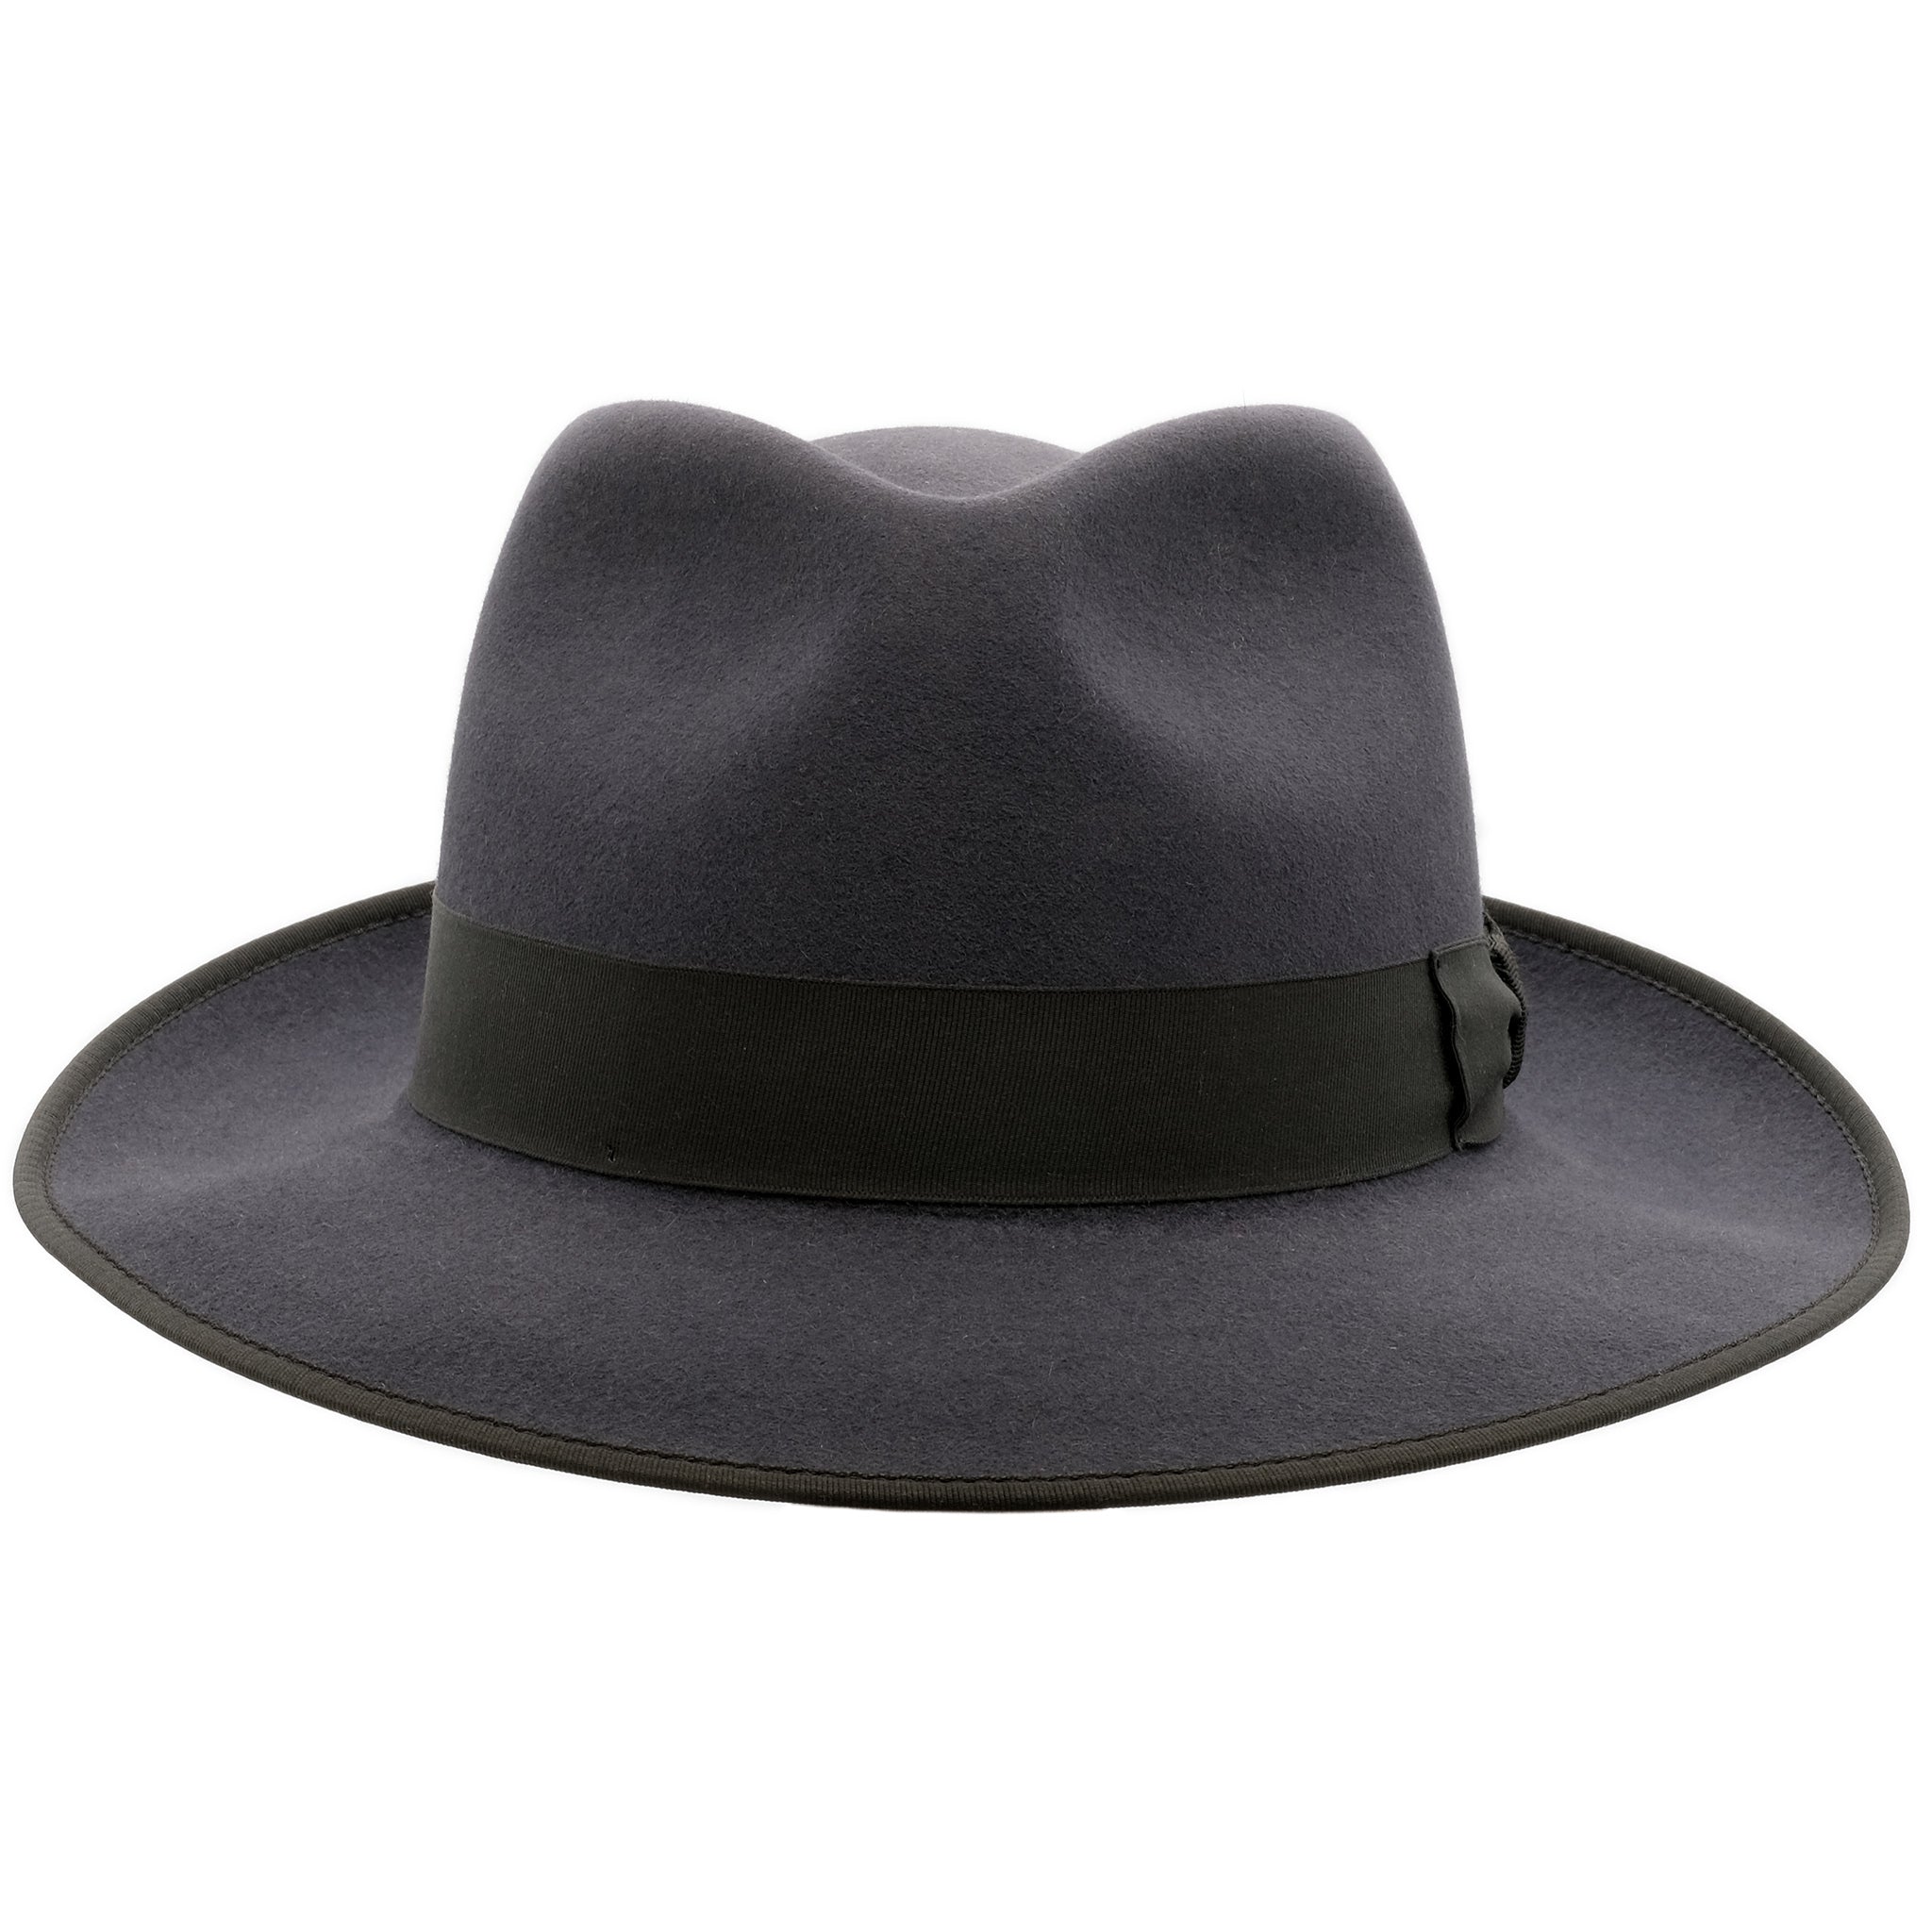 Front view of Akubra Stylemaster hat in Carbon Grey colour